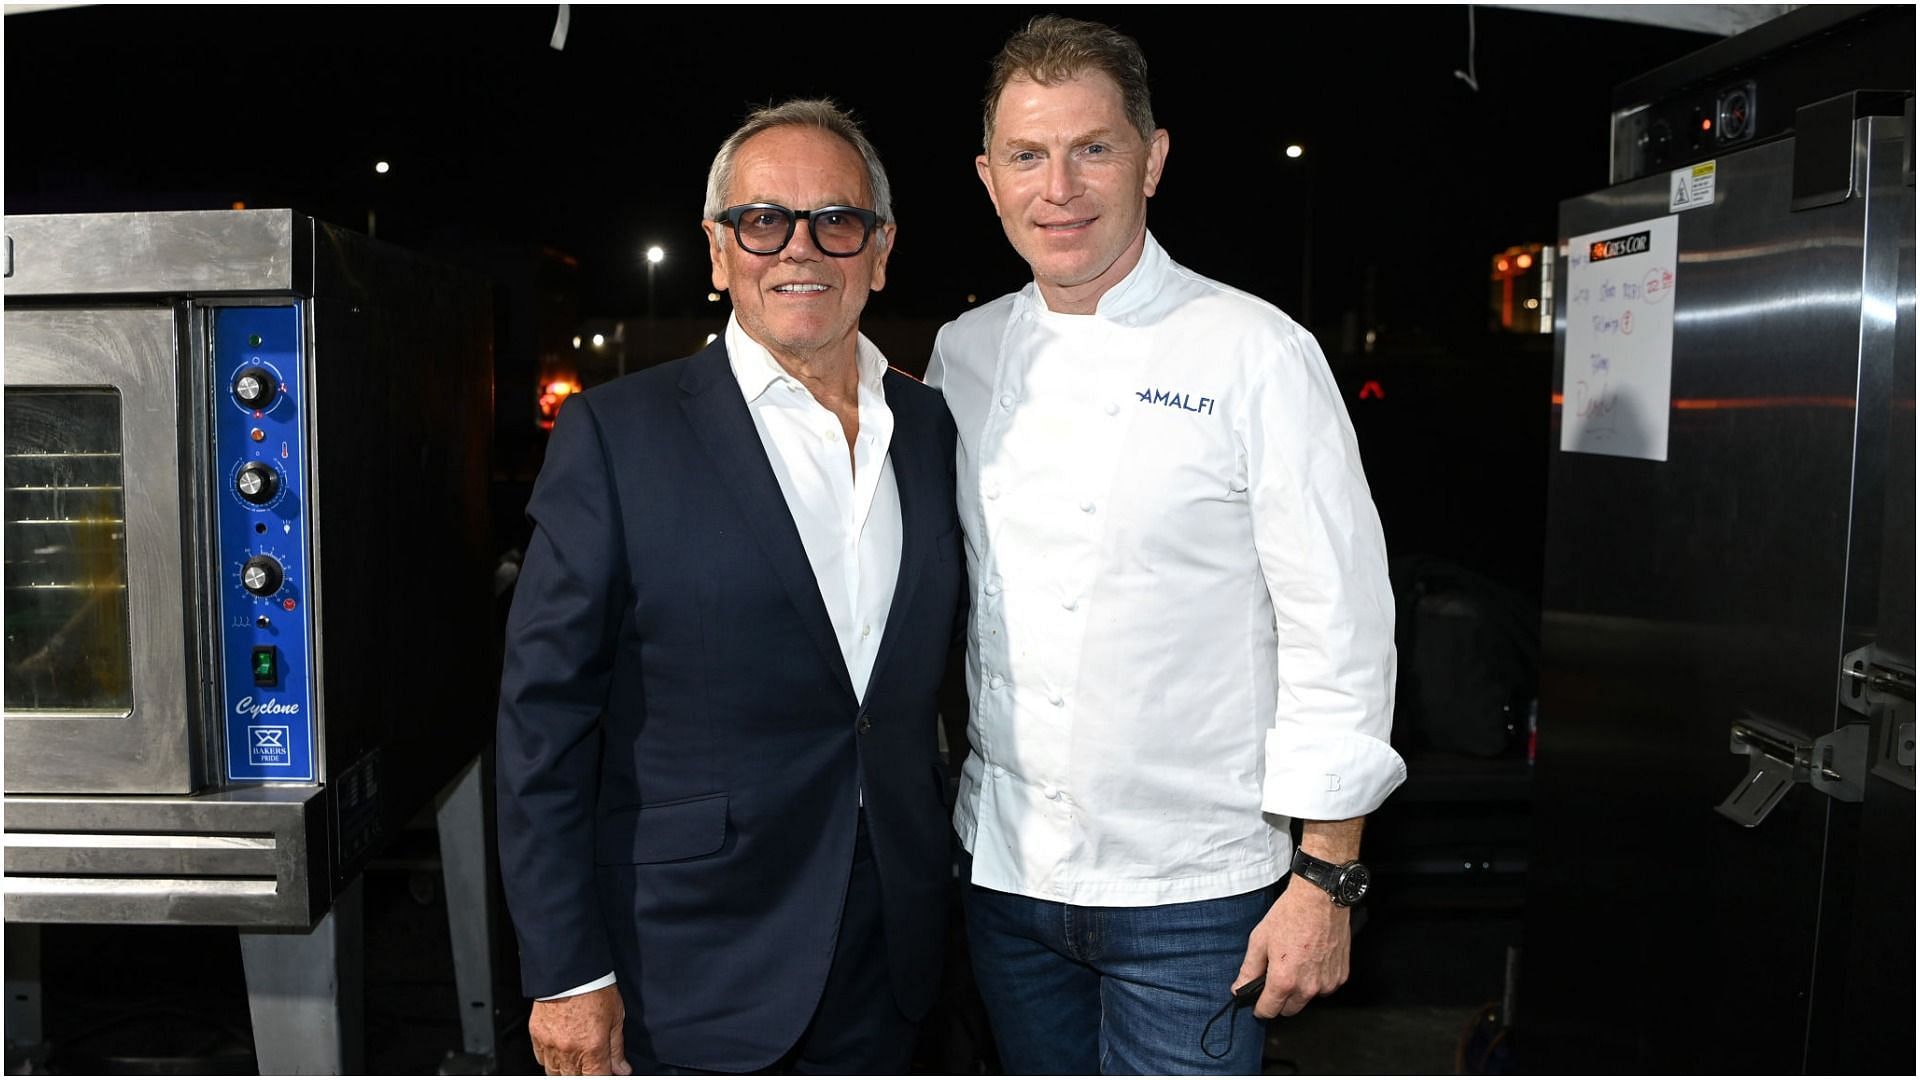 Wolfgang Puck and Bobby Flay attend the 25th annual Keep Memory Alive &#039;Power of Love Gala&#039; benefit for the Cleveland Clinic Lou Ruvo Center for Brain Health at Resorts World Las Vegas on October 16, 2021, in Las Vegas, Nevada (Image via Getty Images)